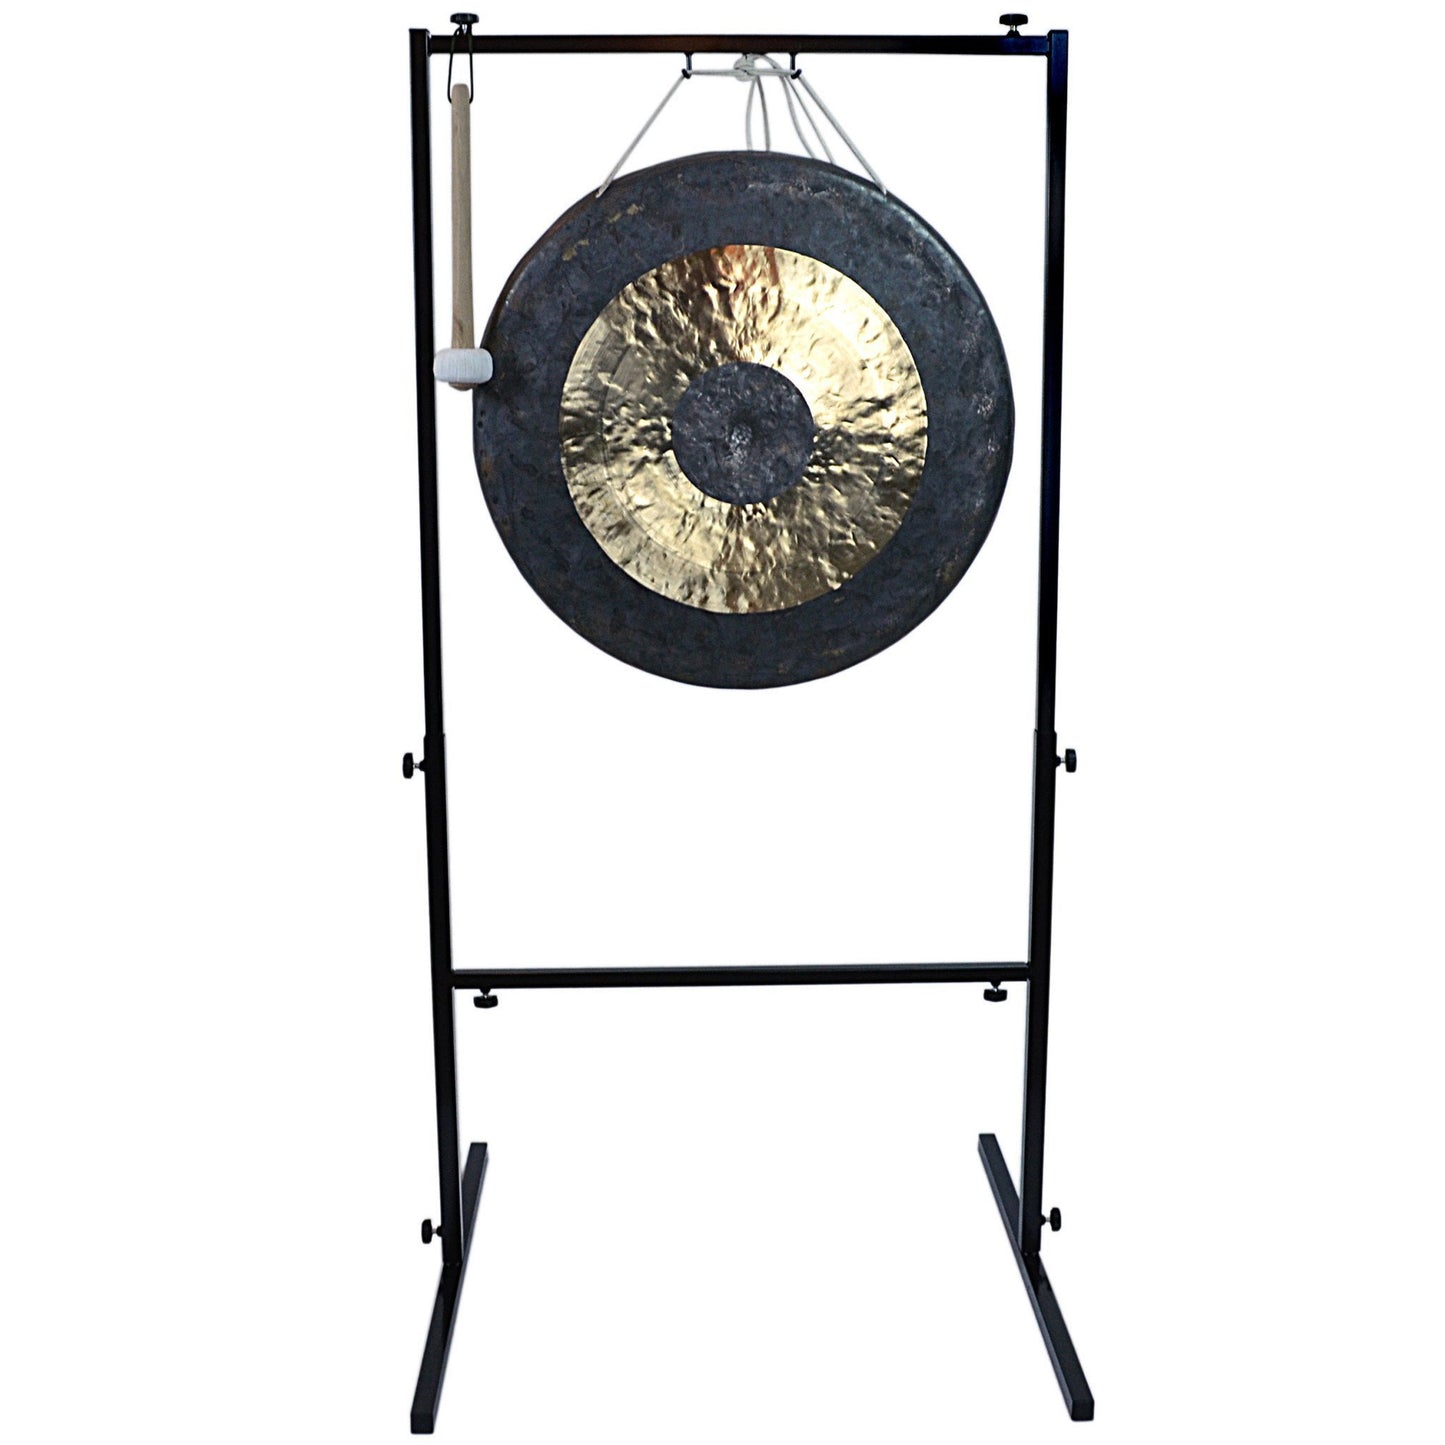 The Gong Shop Large Chinese Gongs with Stand Combos 24" to 34" 26" Chau Gong on Wuhan Gong Stand with Mallet